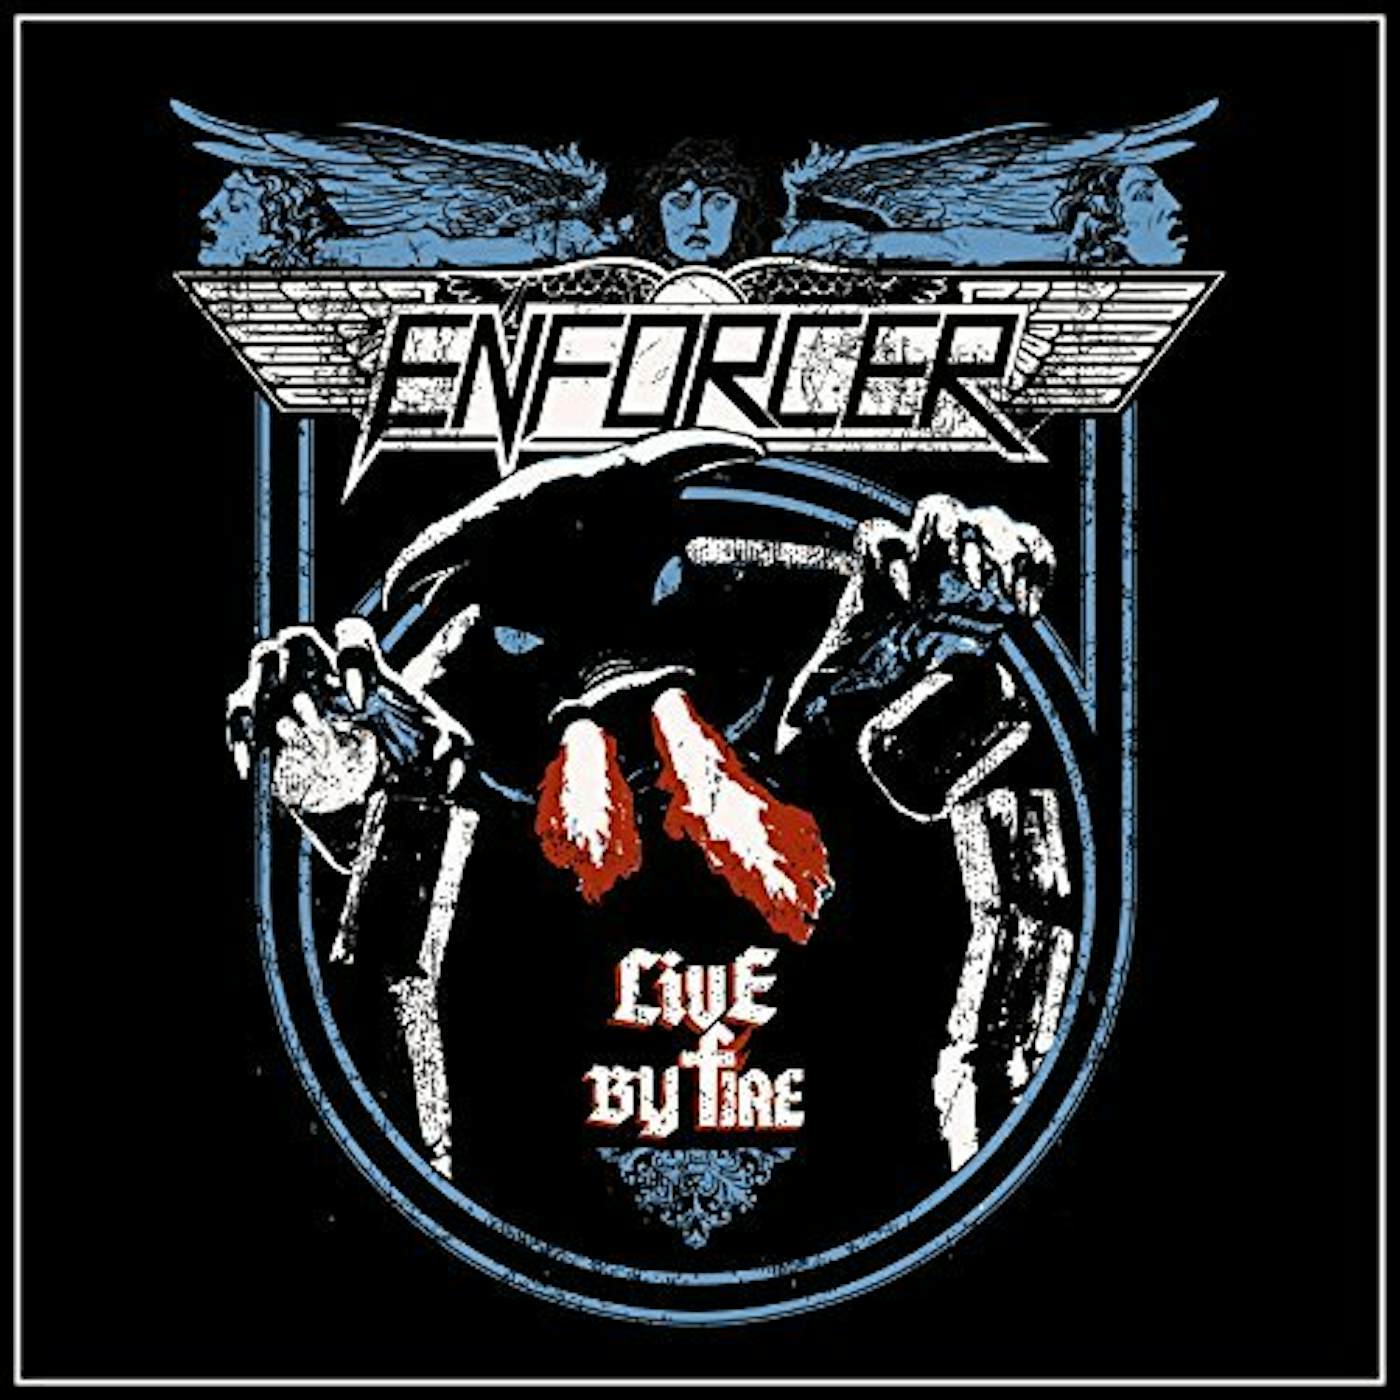 Enforcer Live By Fire Vinyl Record